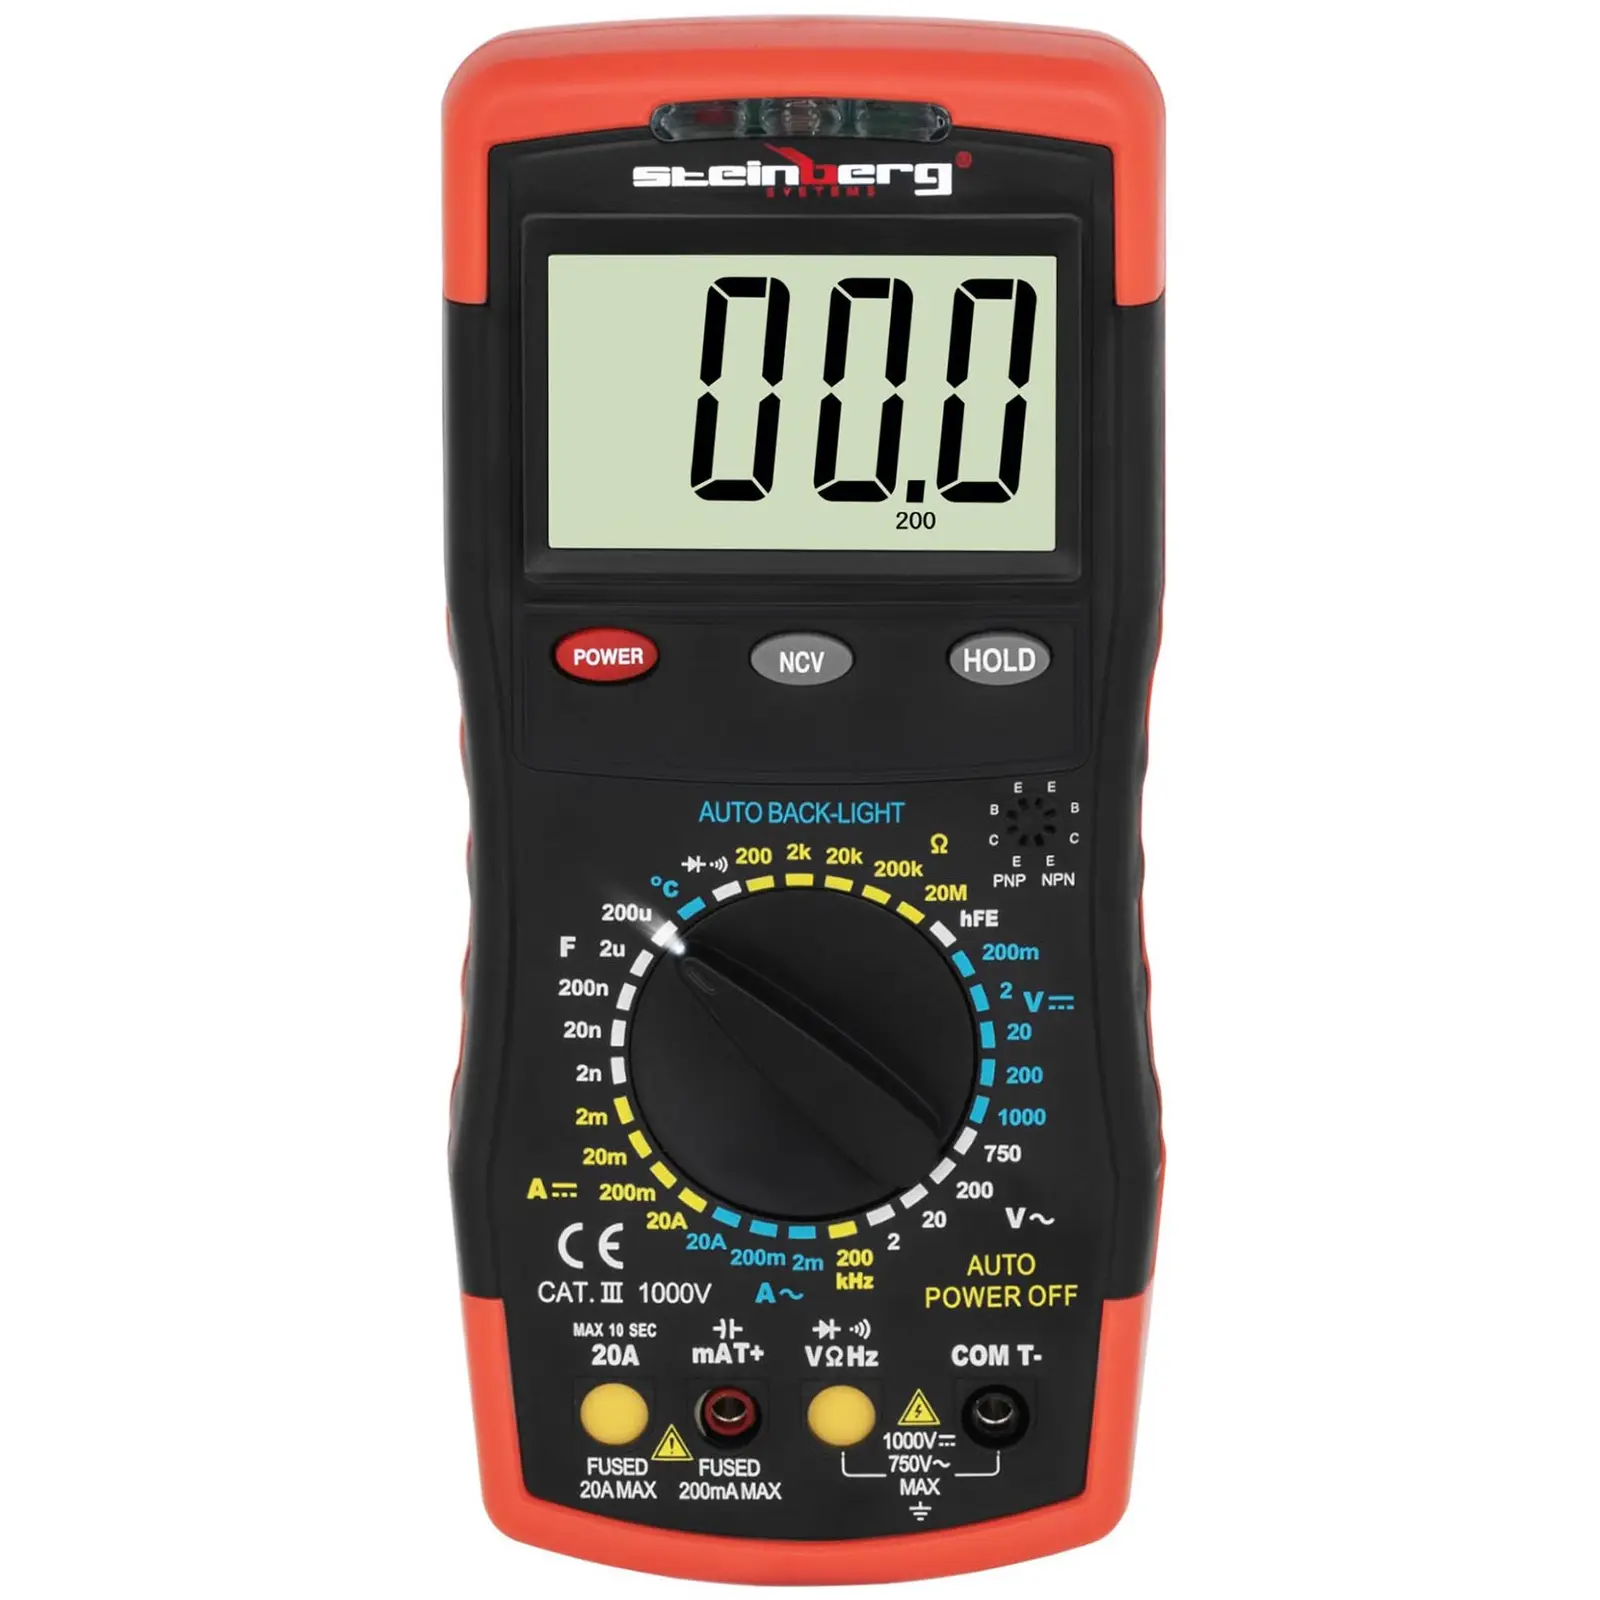 Multimeter - 2.000 counts - hFE - NCV - termometer